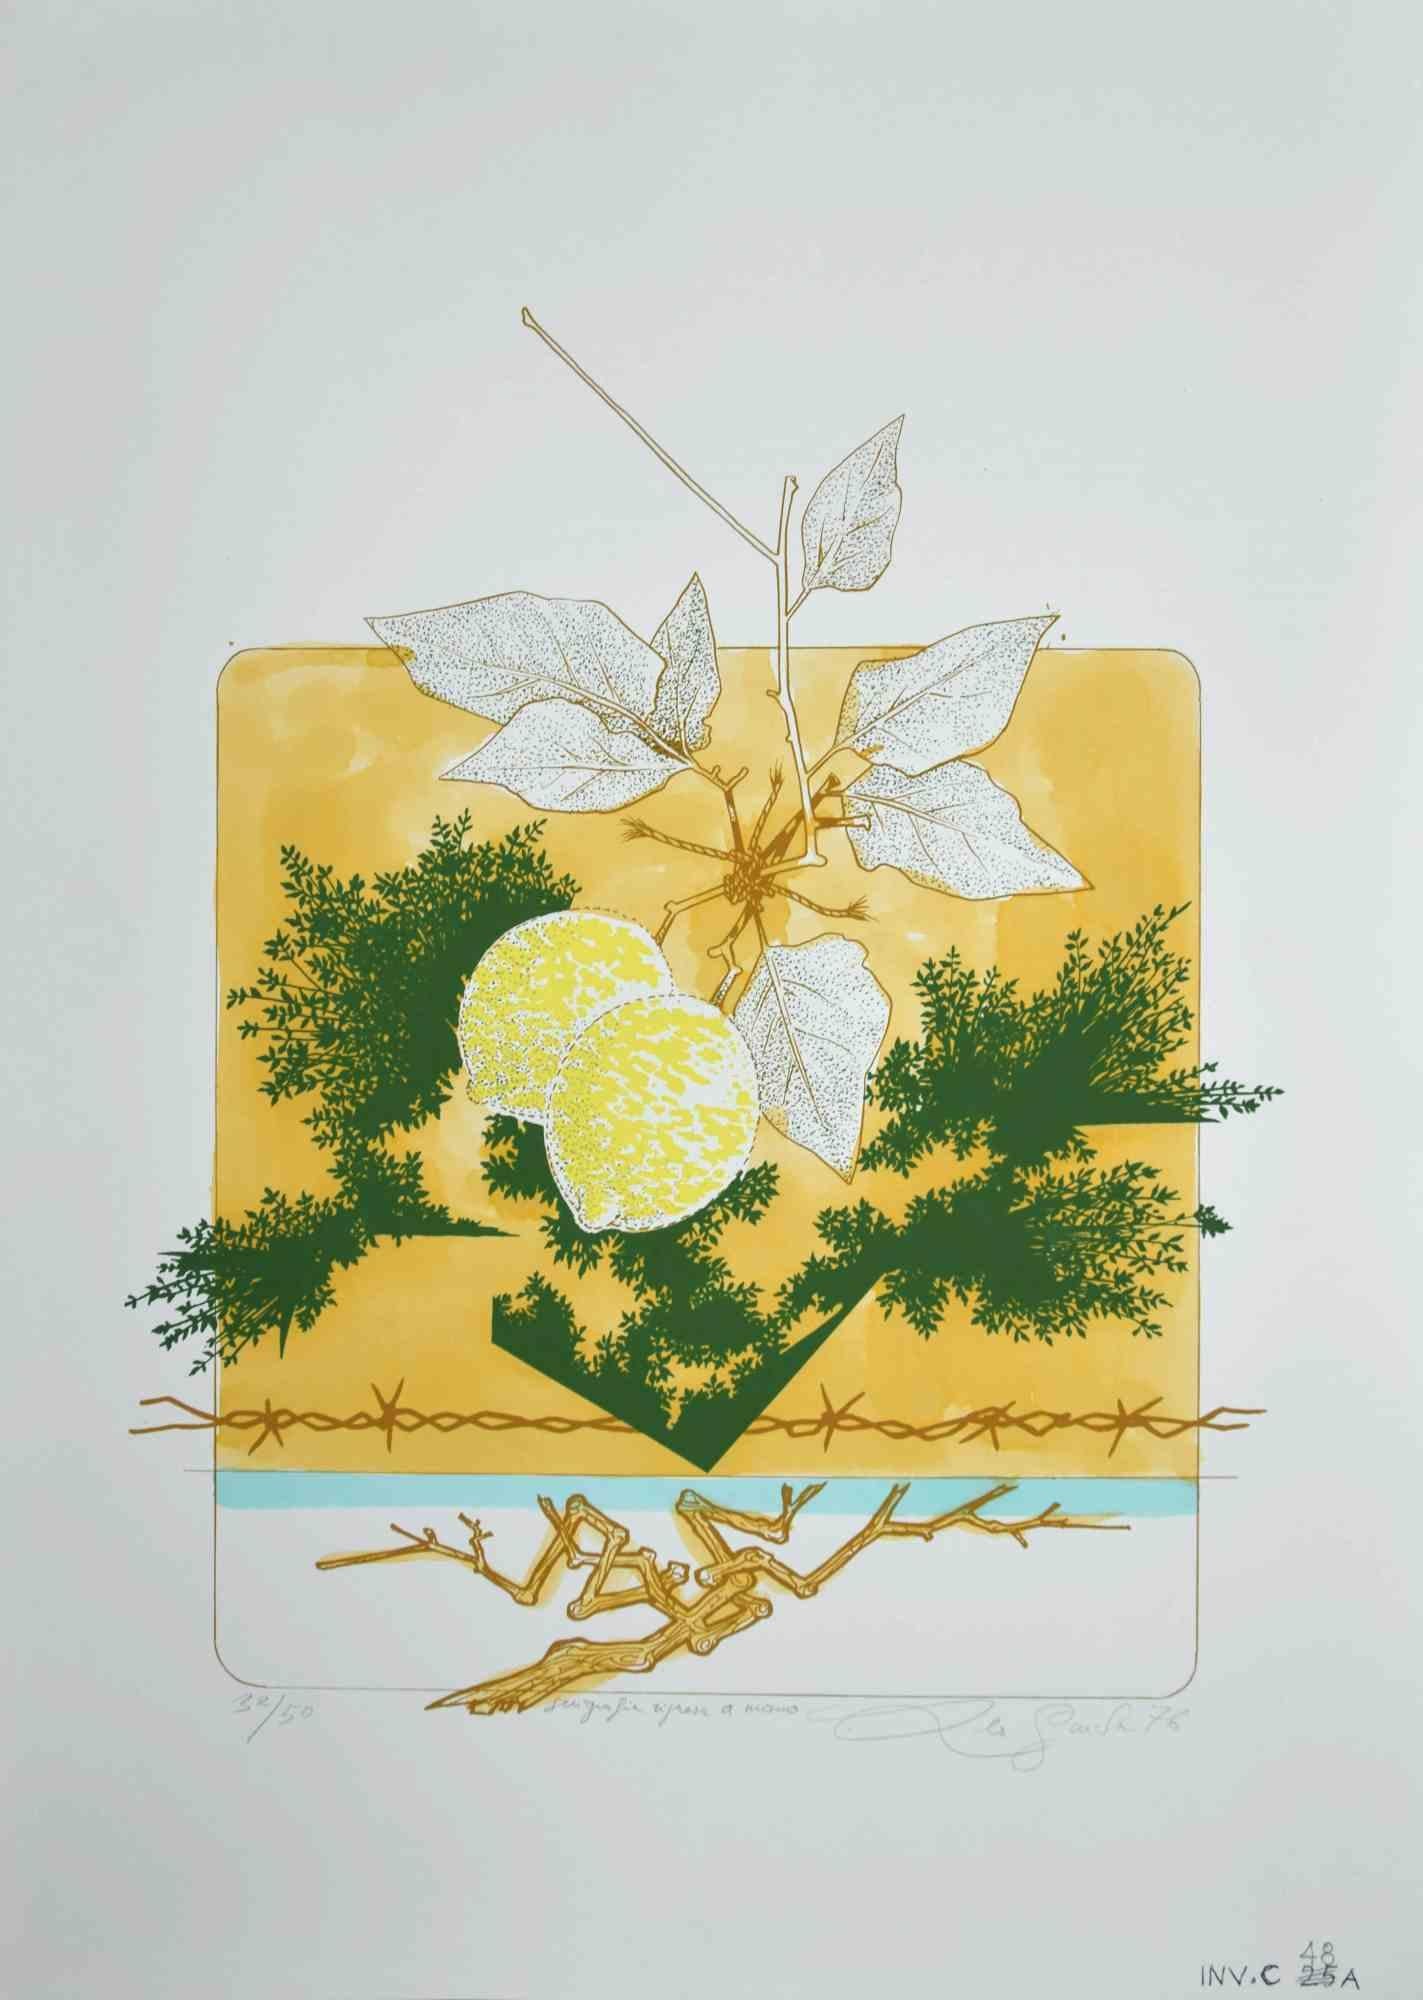 Still Life is an original screen print realized by Leo Guida in 1976.

Hand-signed on the lower right and dated in pencil. Numbered on the lower left,  from the edition of 50 prints.

Good condition.

Leo Guida  (1992 - 2017). Sensitive to current